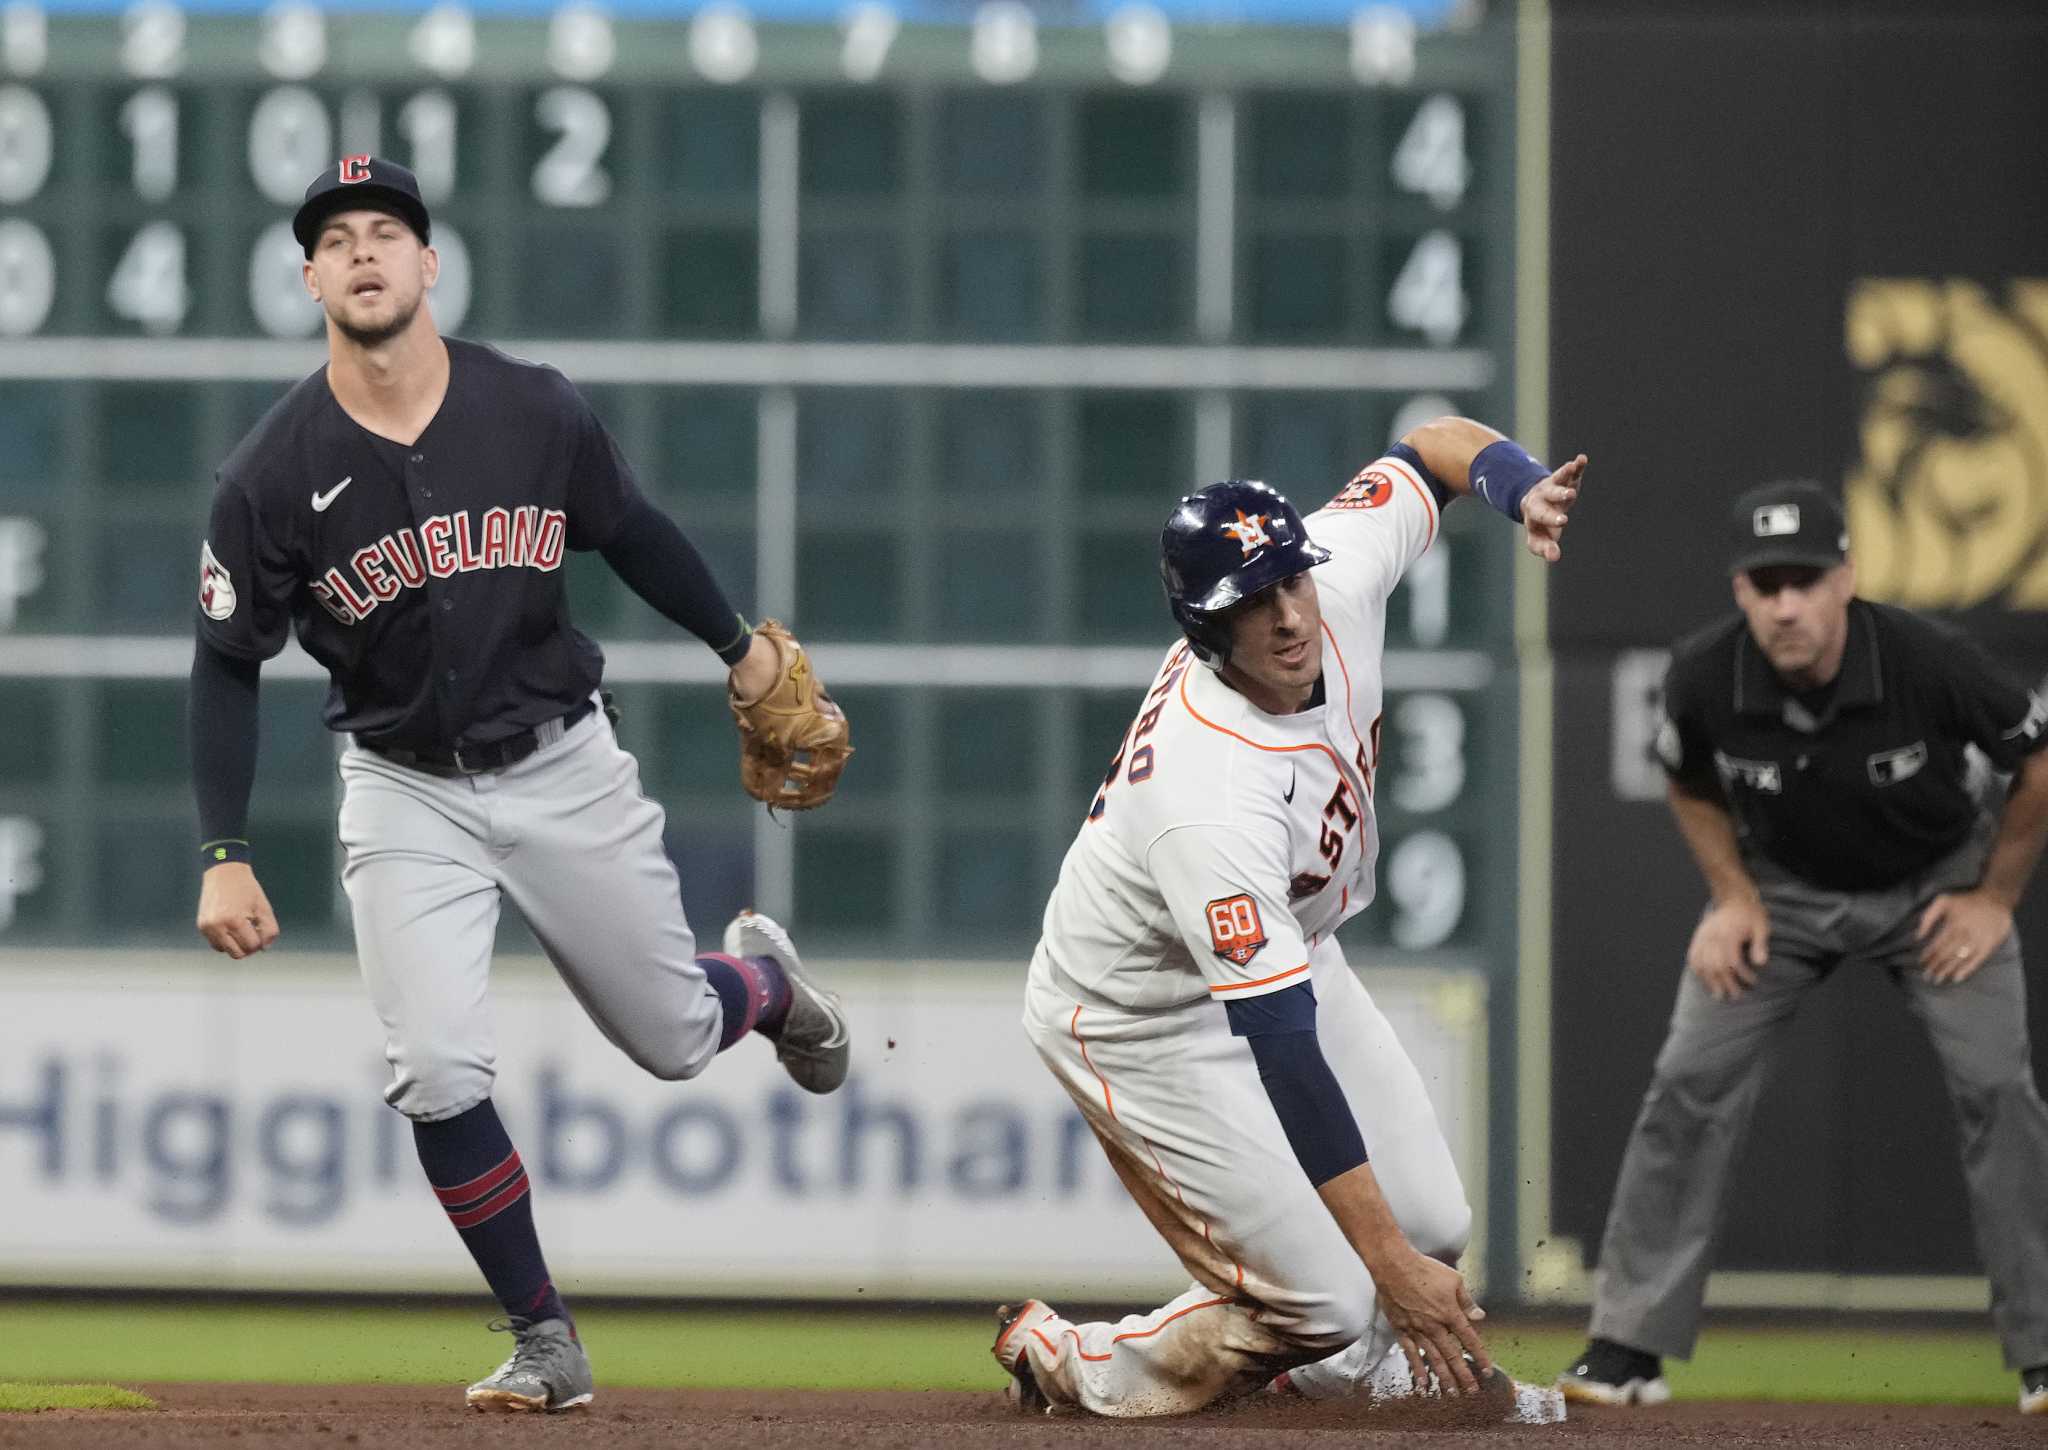 Houston Astros How to watch Sundays game that isnt on TV